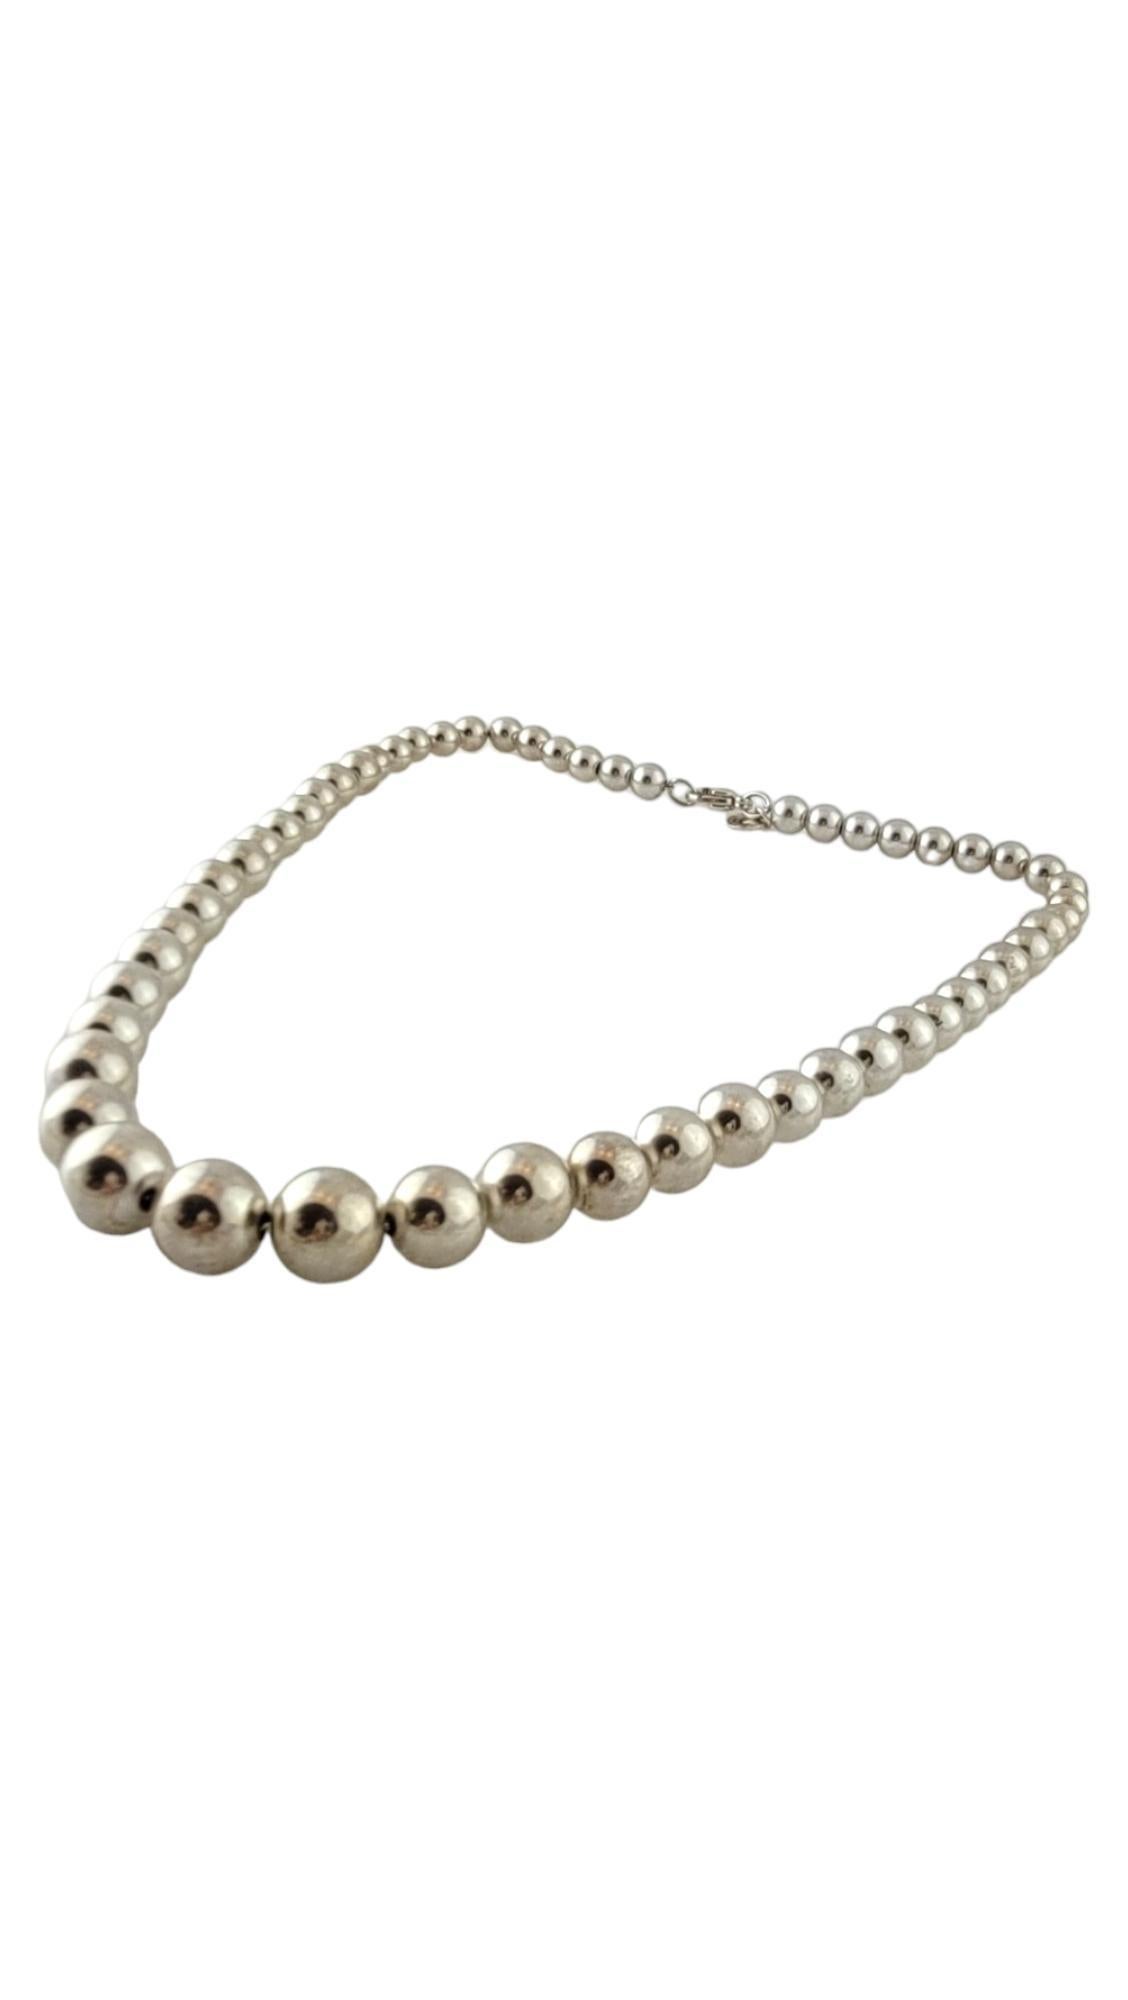 Vintage Tiffany & Co Sterling Silver Bead Necklace

This beautiful sterling silver gradual bead necklace by designer Tiffany & Co. is going to look gorgeous on you!

Length: 15.75